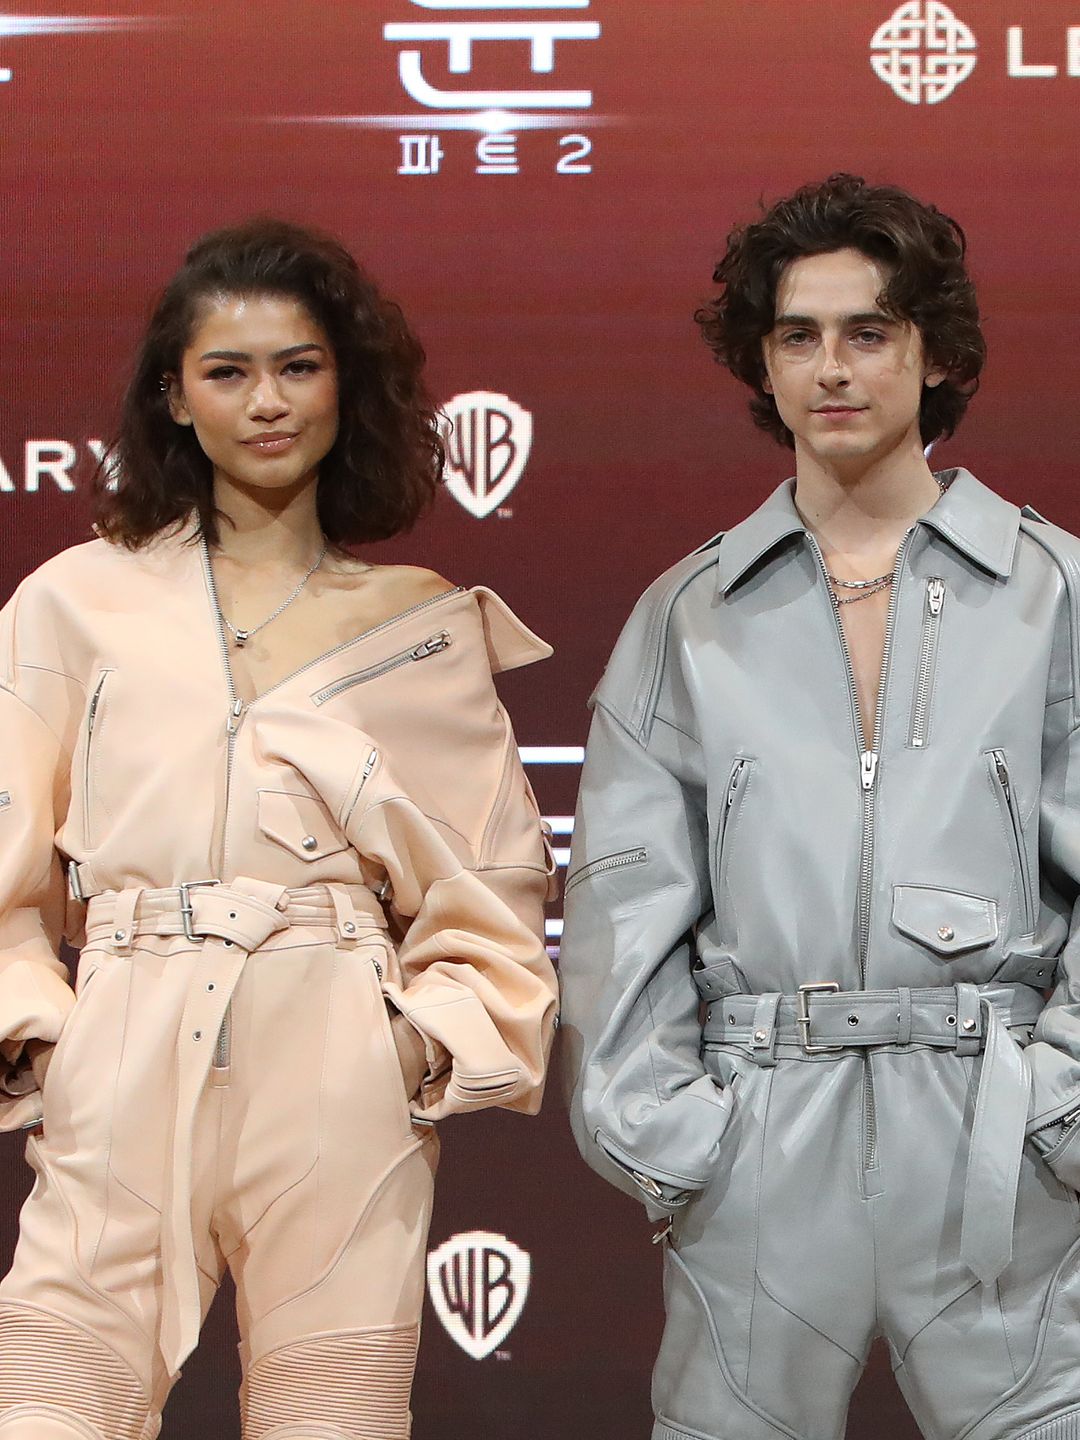 Zendaya and Timothée wore matching jumpsuits in an iconic press tour fashion moment